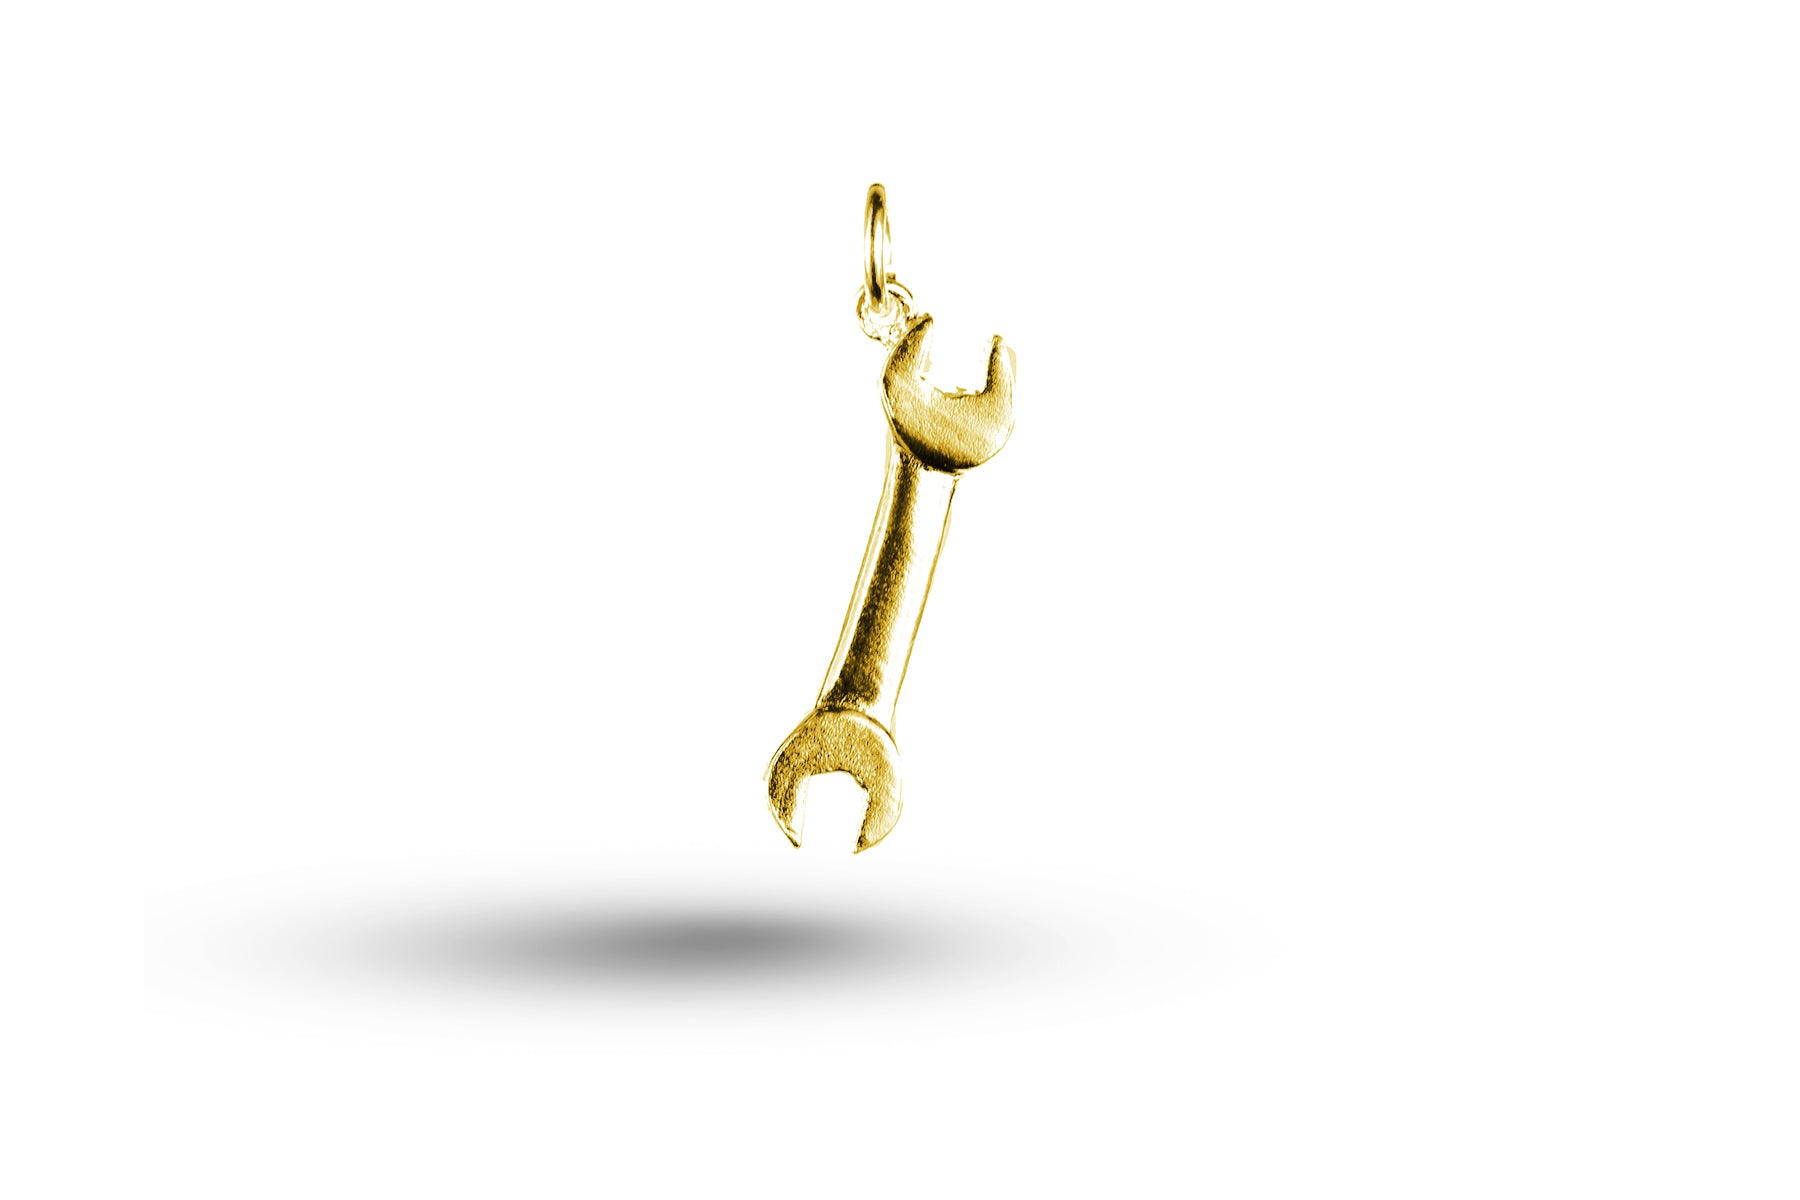 Yellow gold Double Ended Spanner charm.